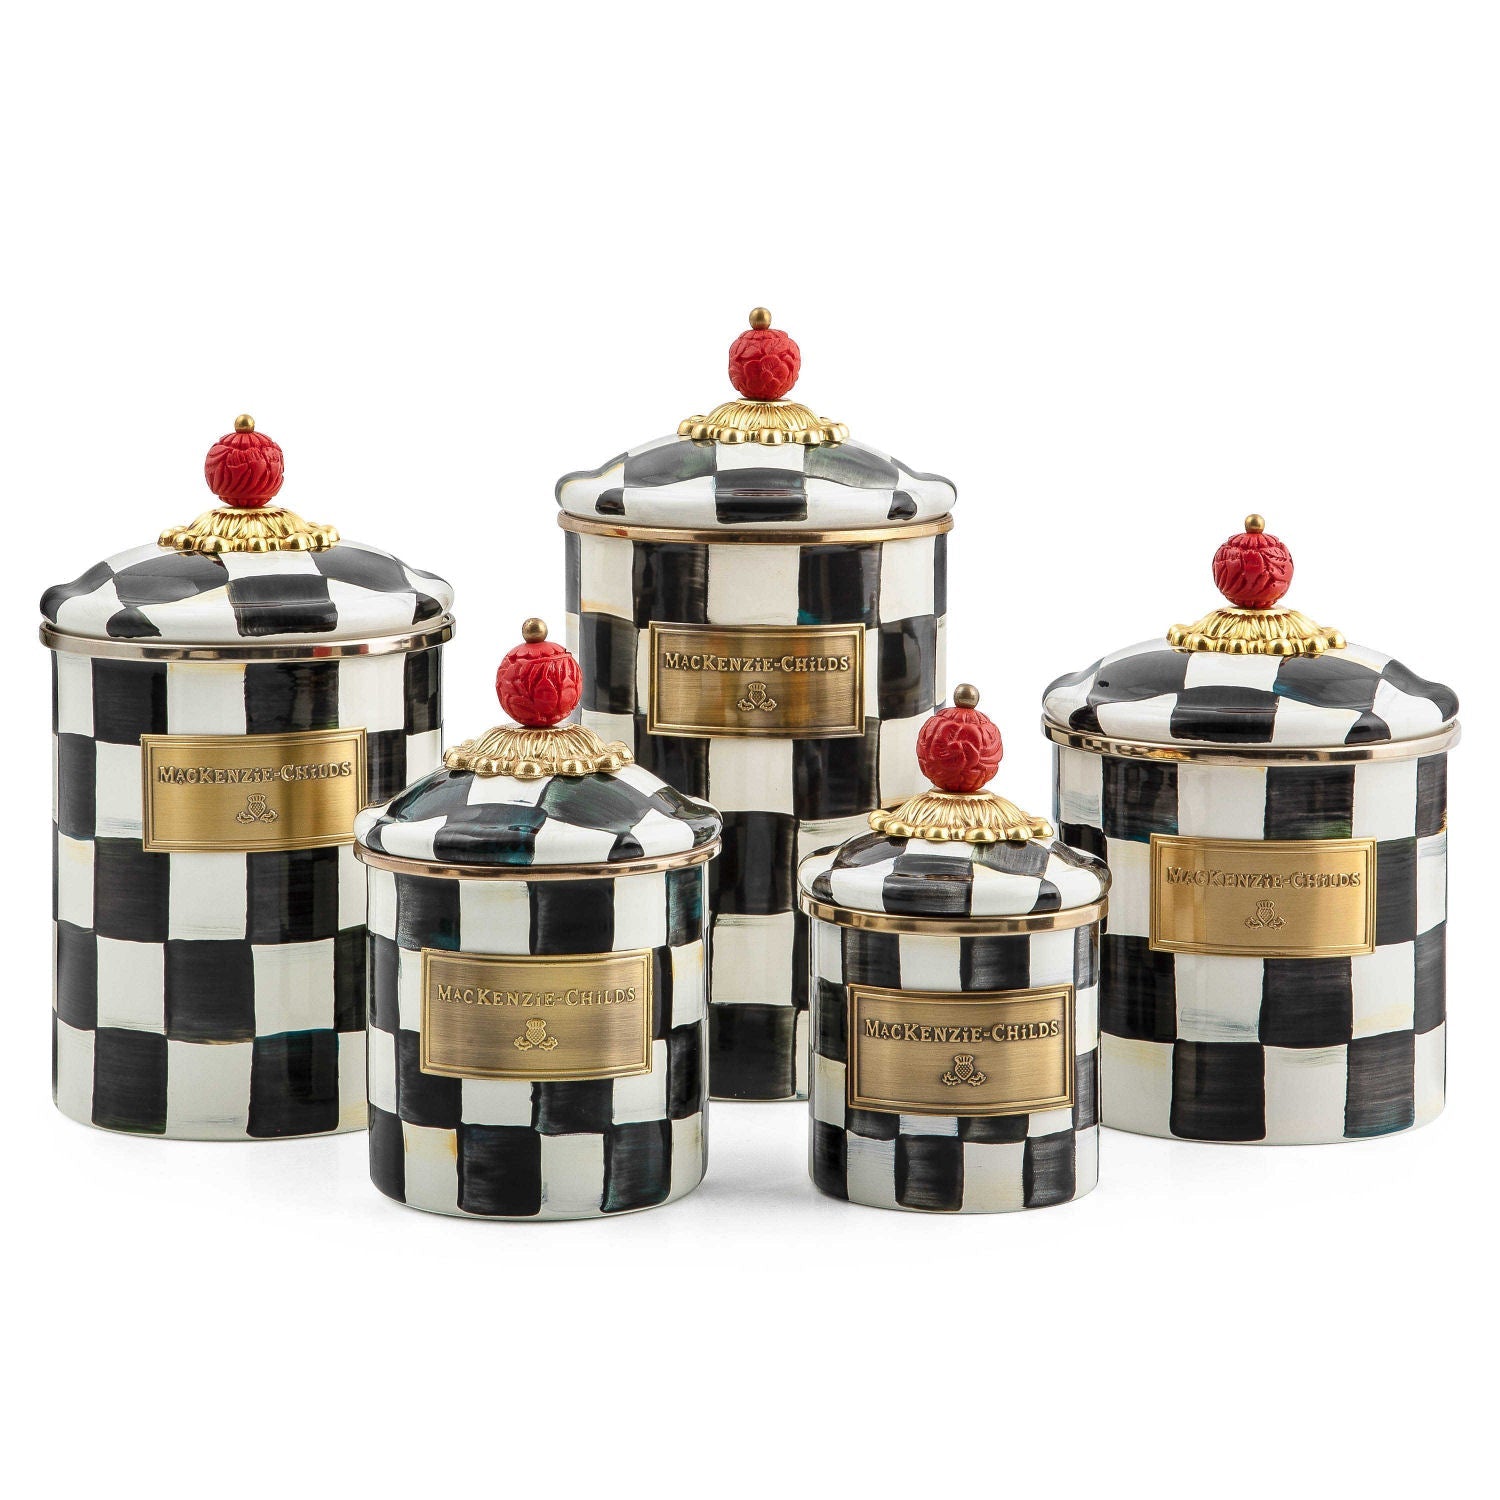 Courtly Check Enamel Canister Small by Mackenzie Childs - |VESIMI Design|